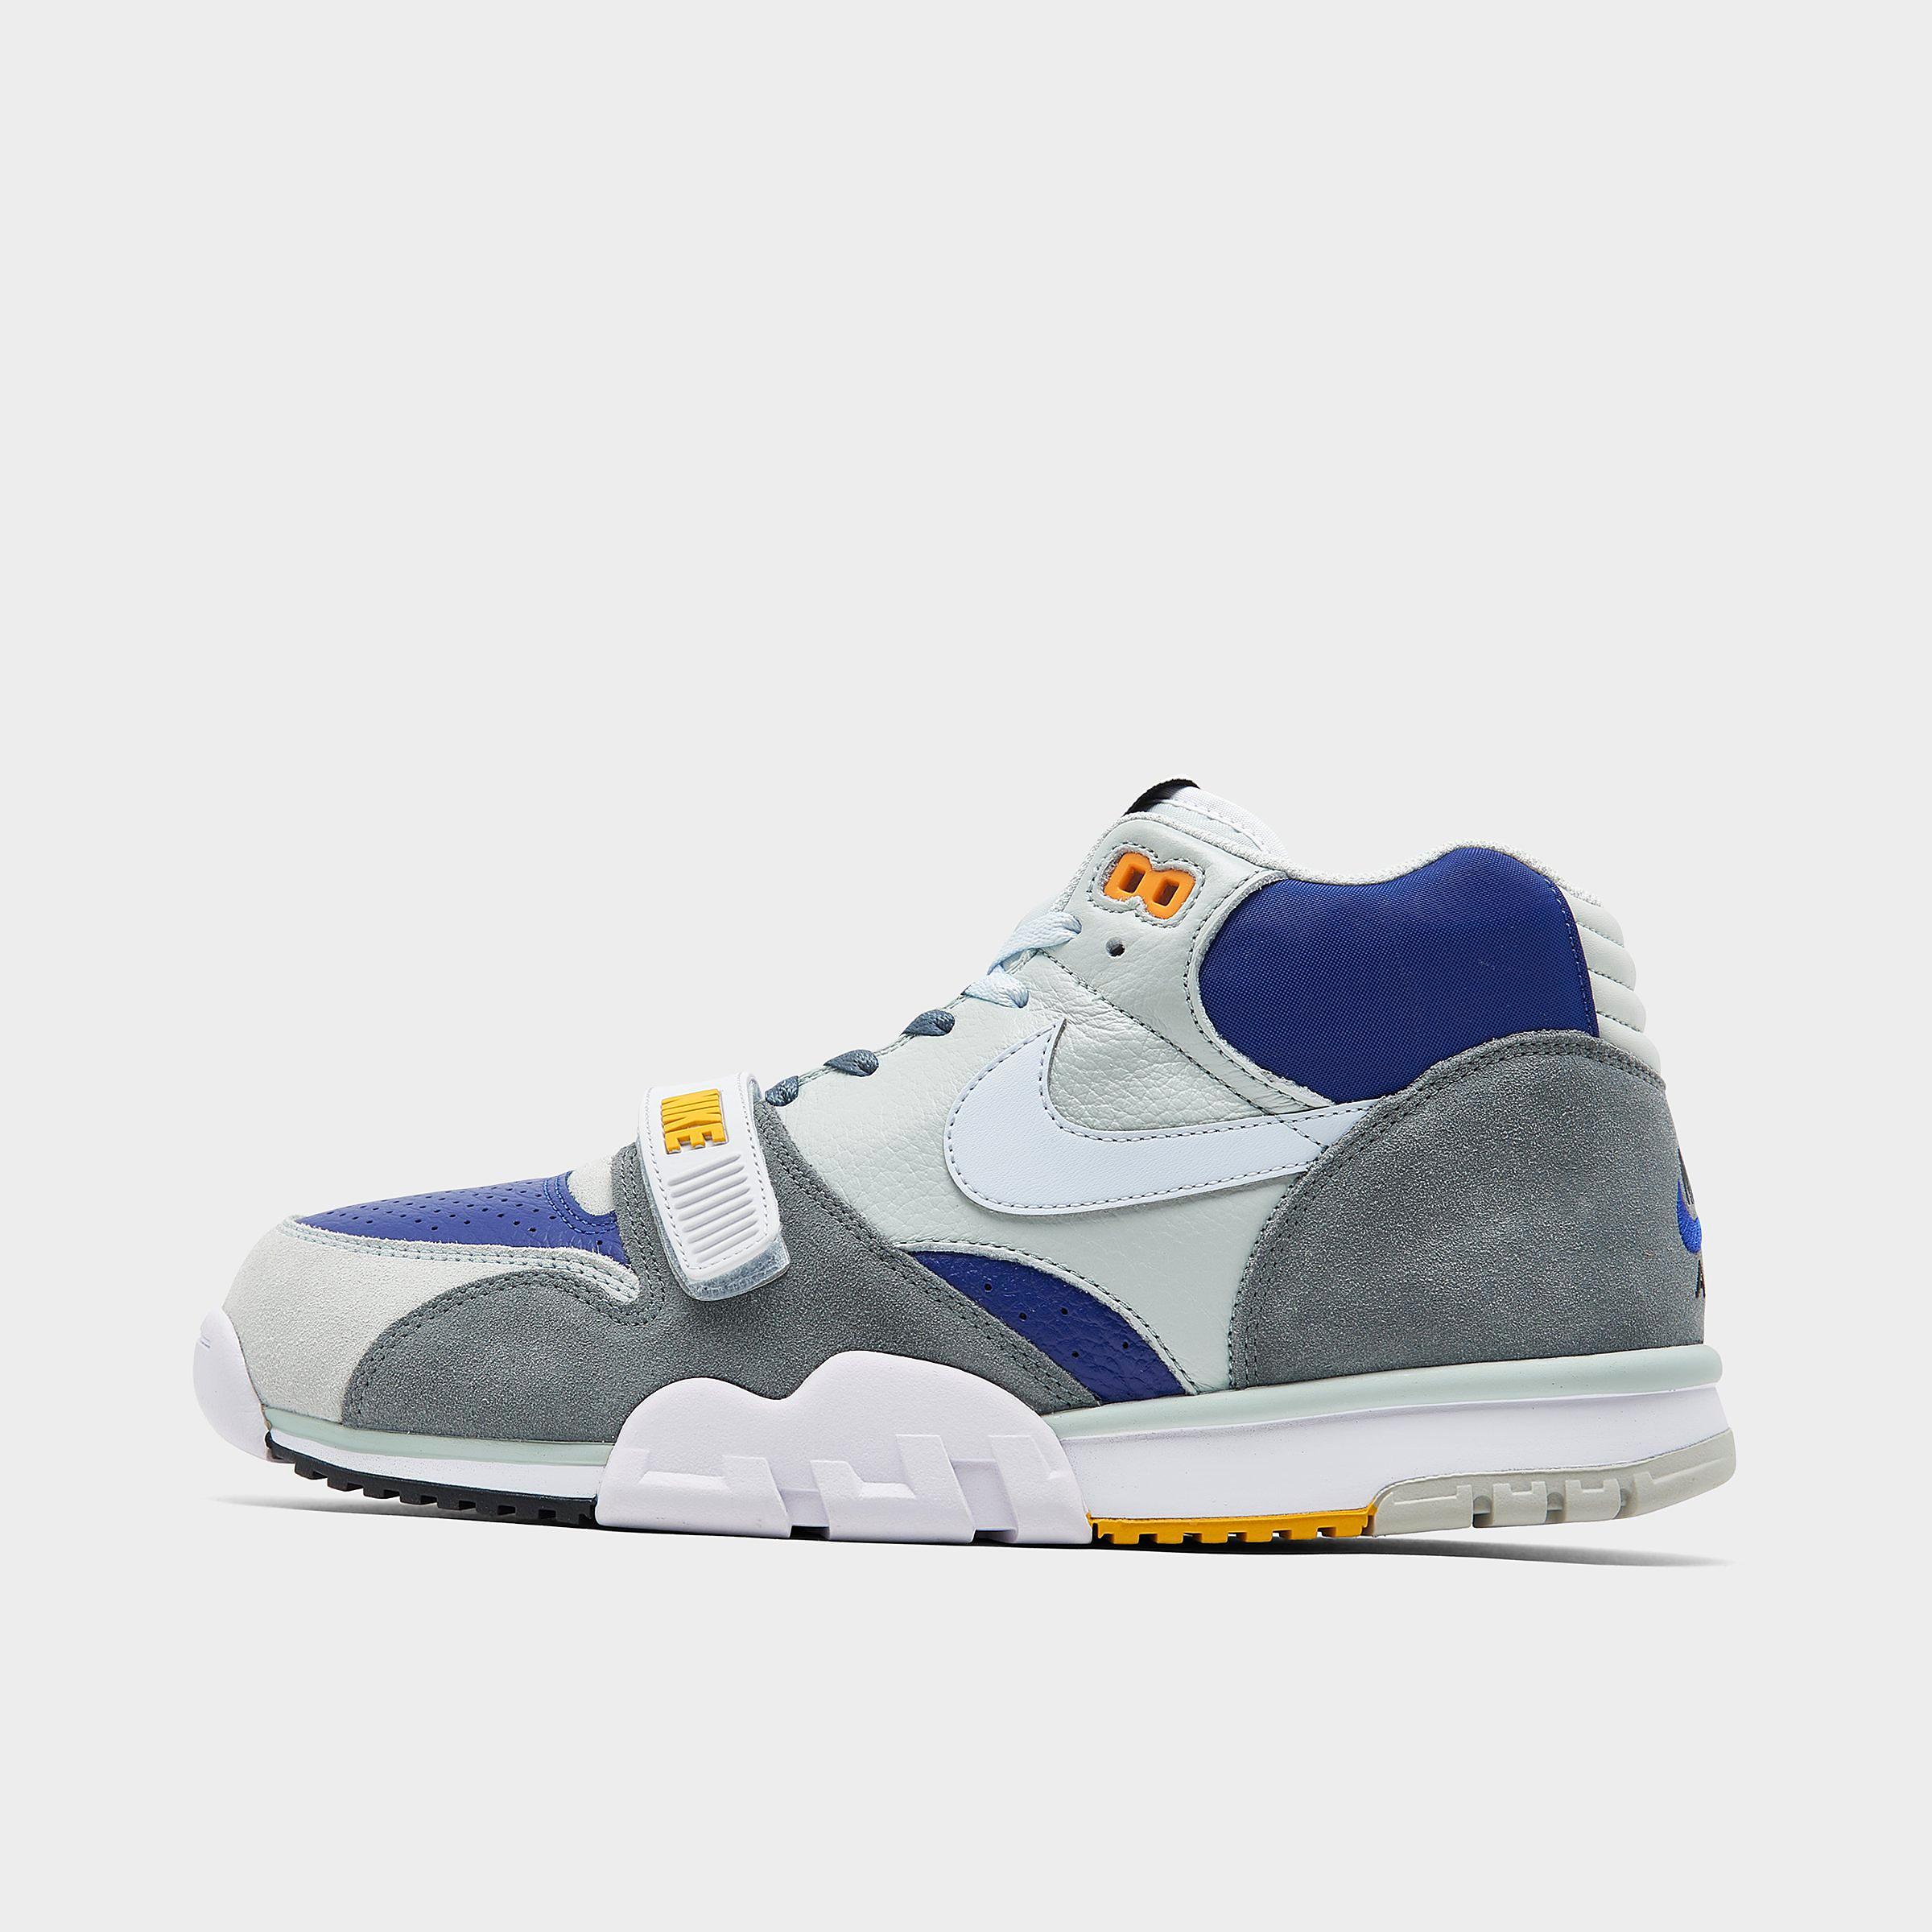 Mens Nike Air Trainer 1 Casual Shoes